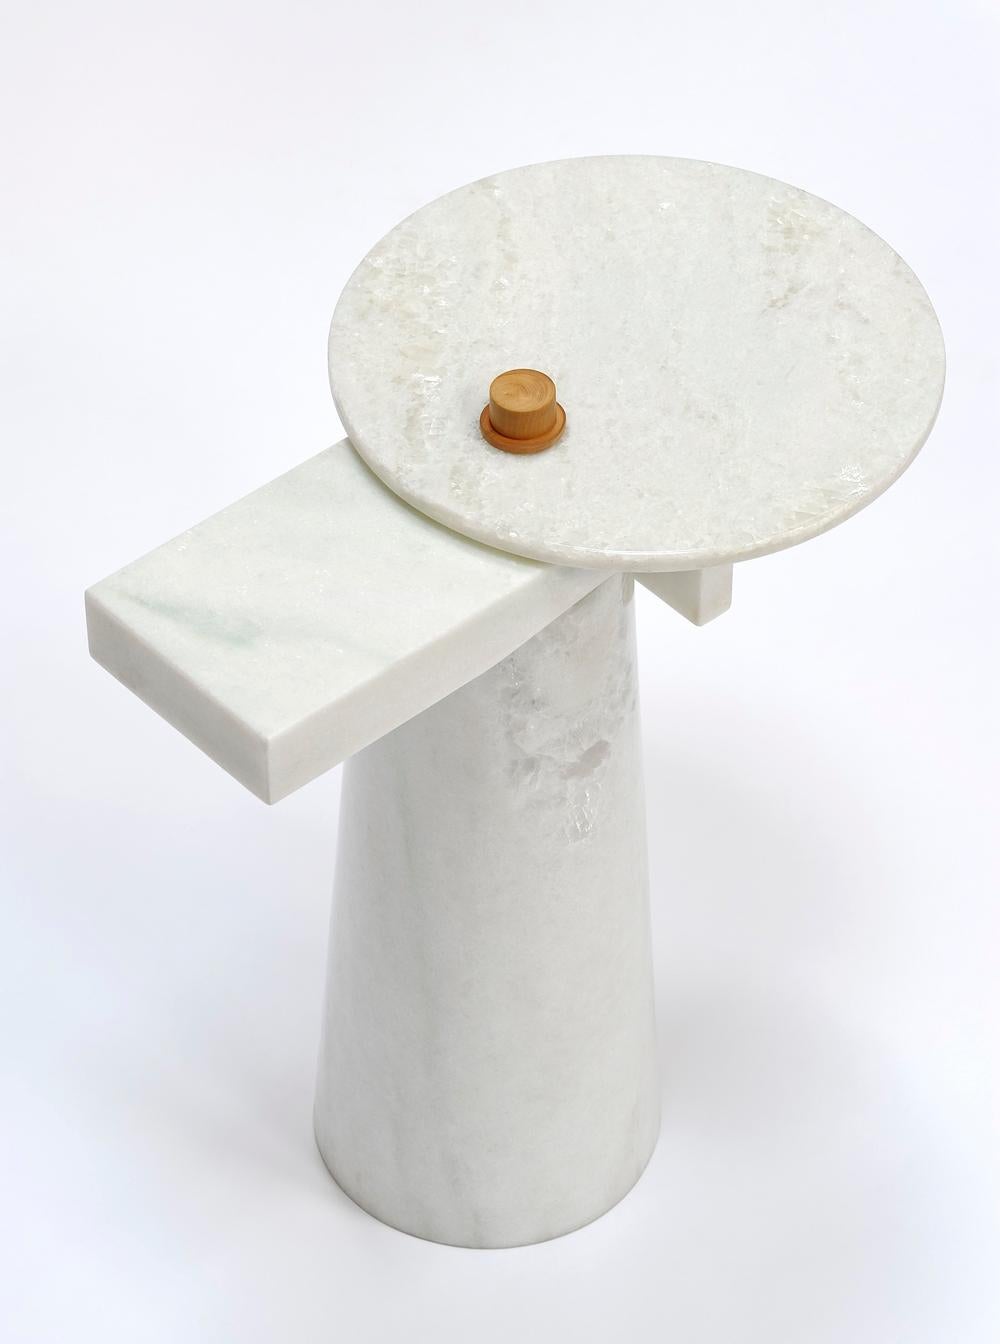 Sculptural gueridon, Leopol, signed Kaaron
Signed and numbered
Edition of 8 + 4 AP
Swivel marble tray
Panama marble
Boxwood from france
Dimensions: (H) 44cm x (diam) 28cm x (L) 38cm.

Kaaron
Important emerging French artists.
